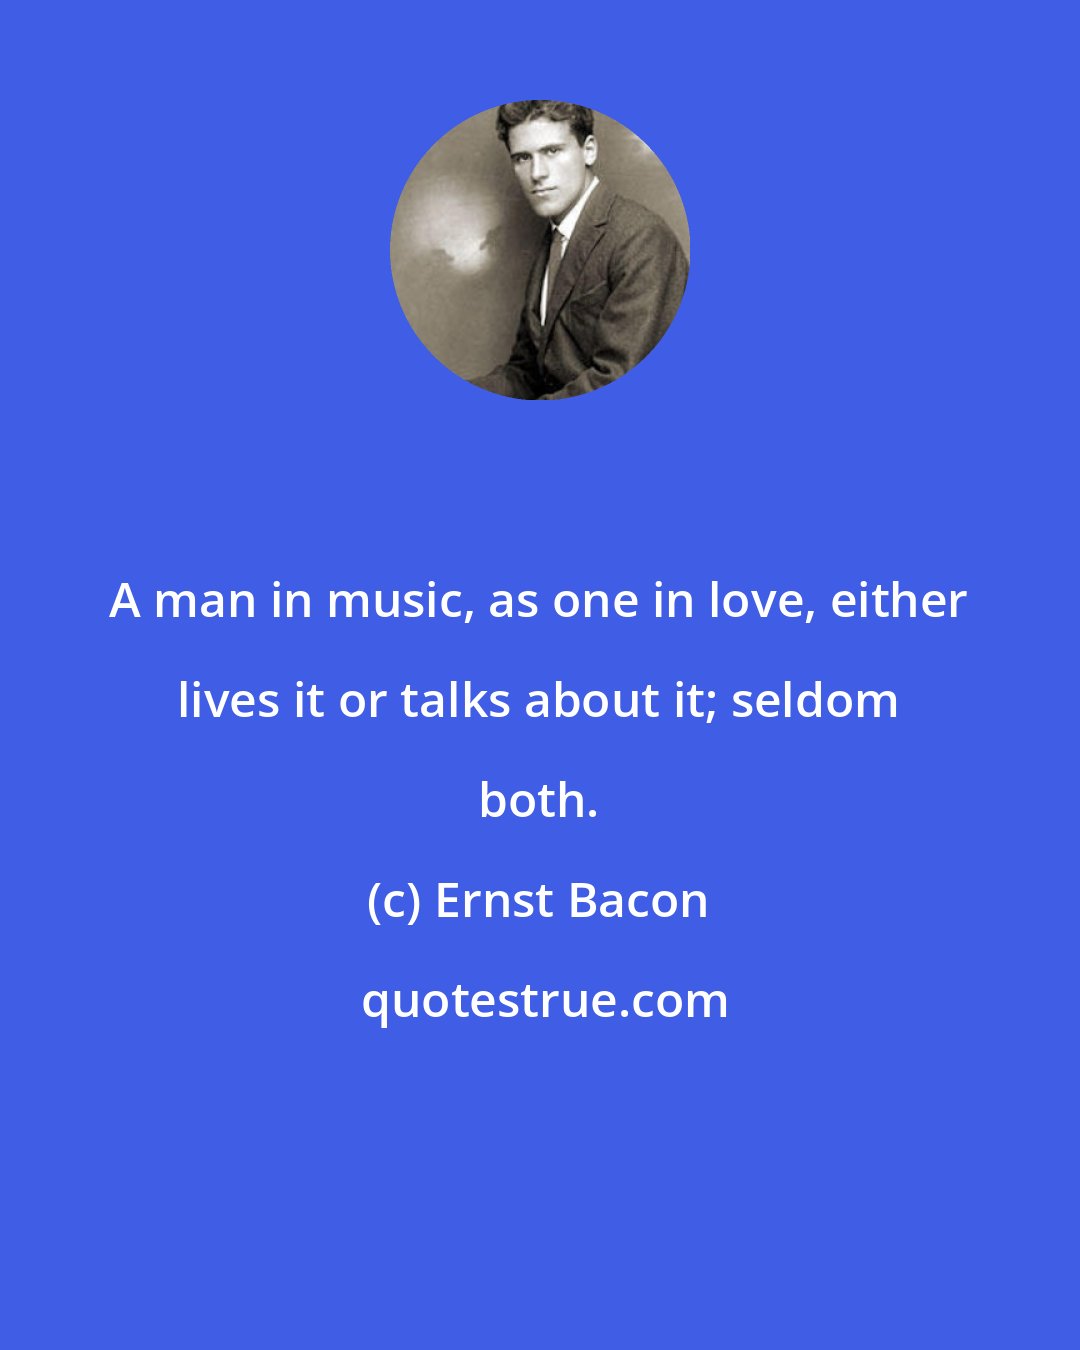 Ernst Bacon: A man in music, as one in love, either lives it or talks about it; seldom both.